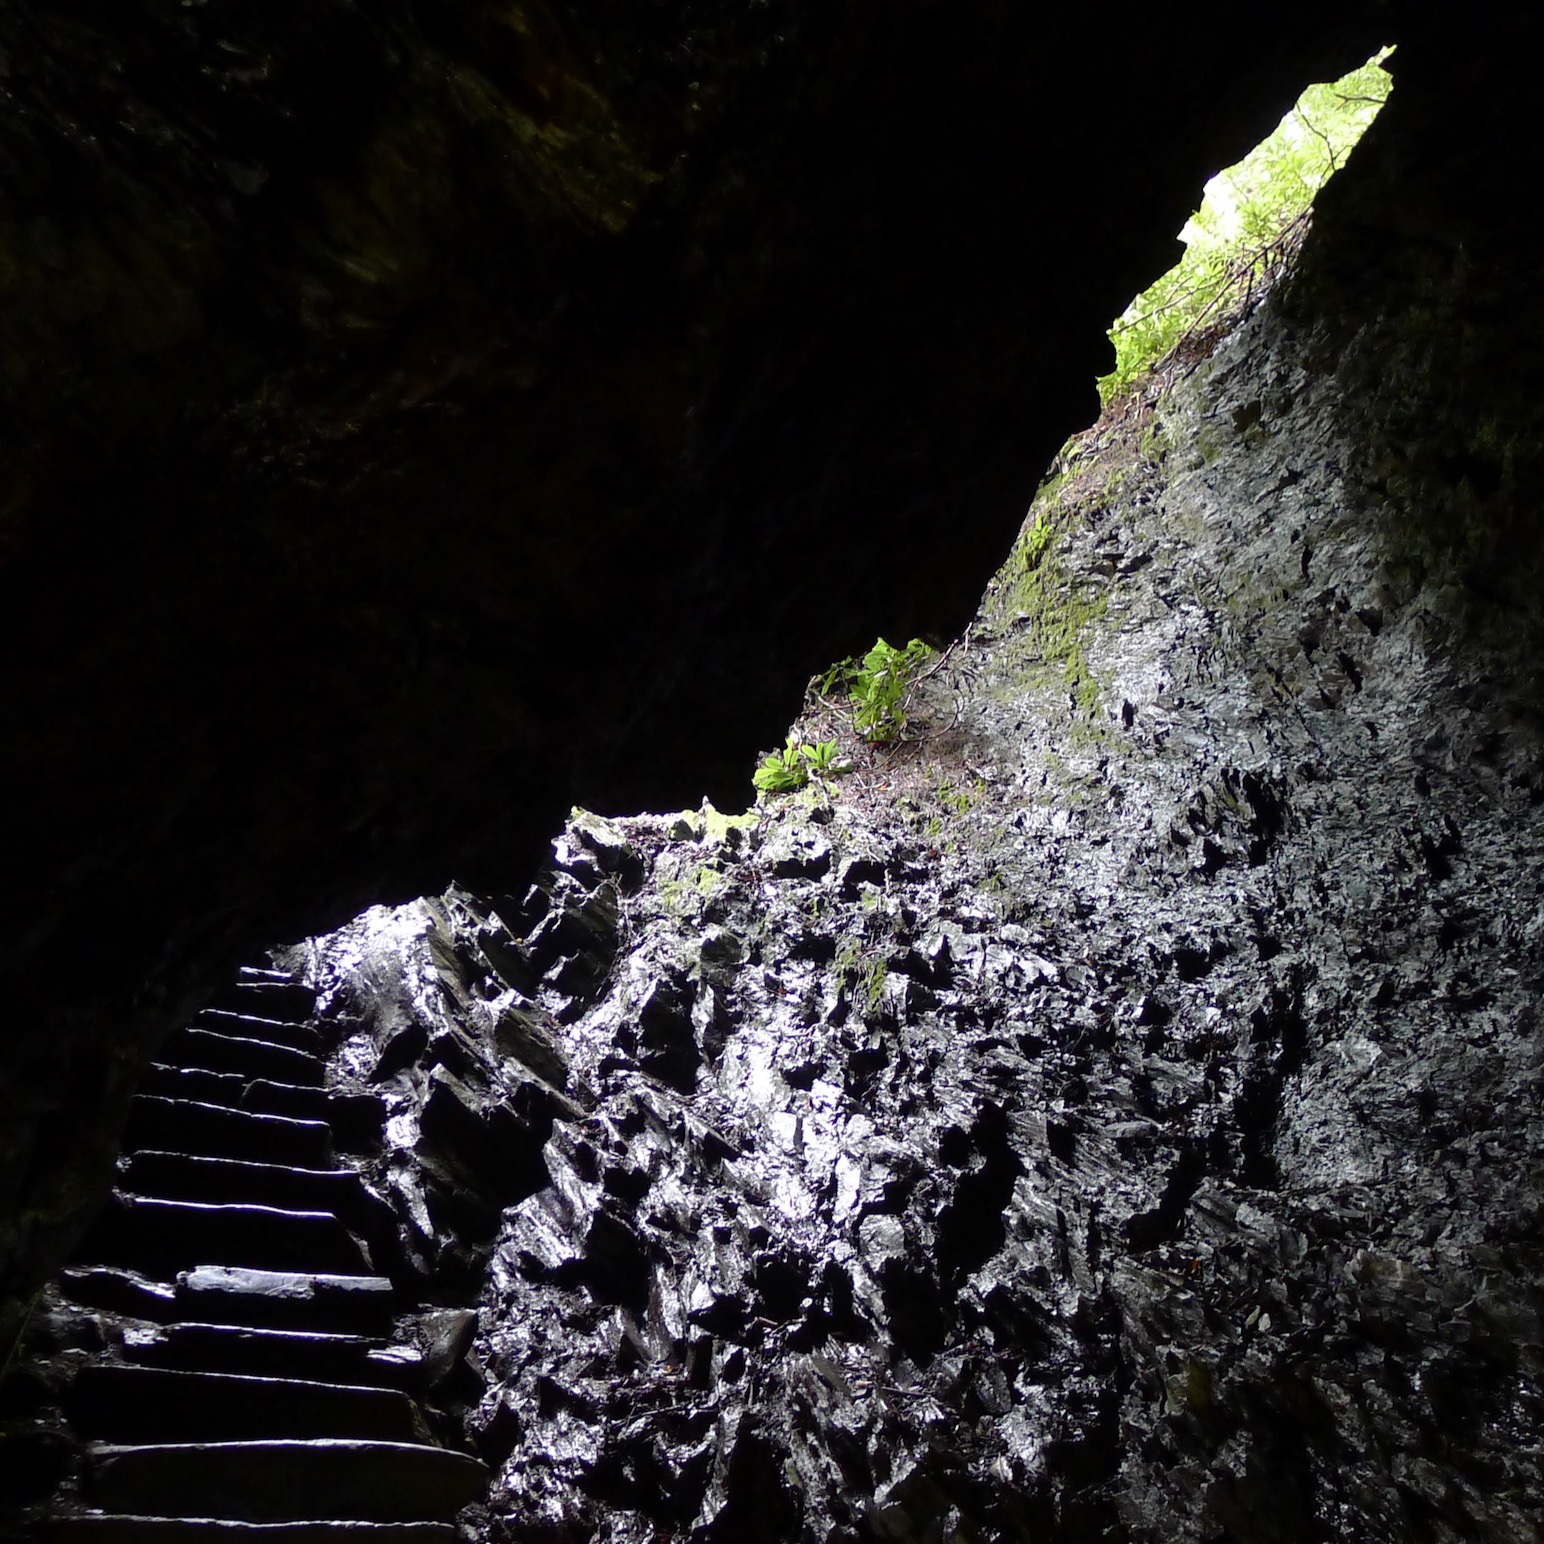 wet stairs leading up from a cave into sunlight